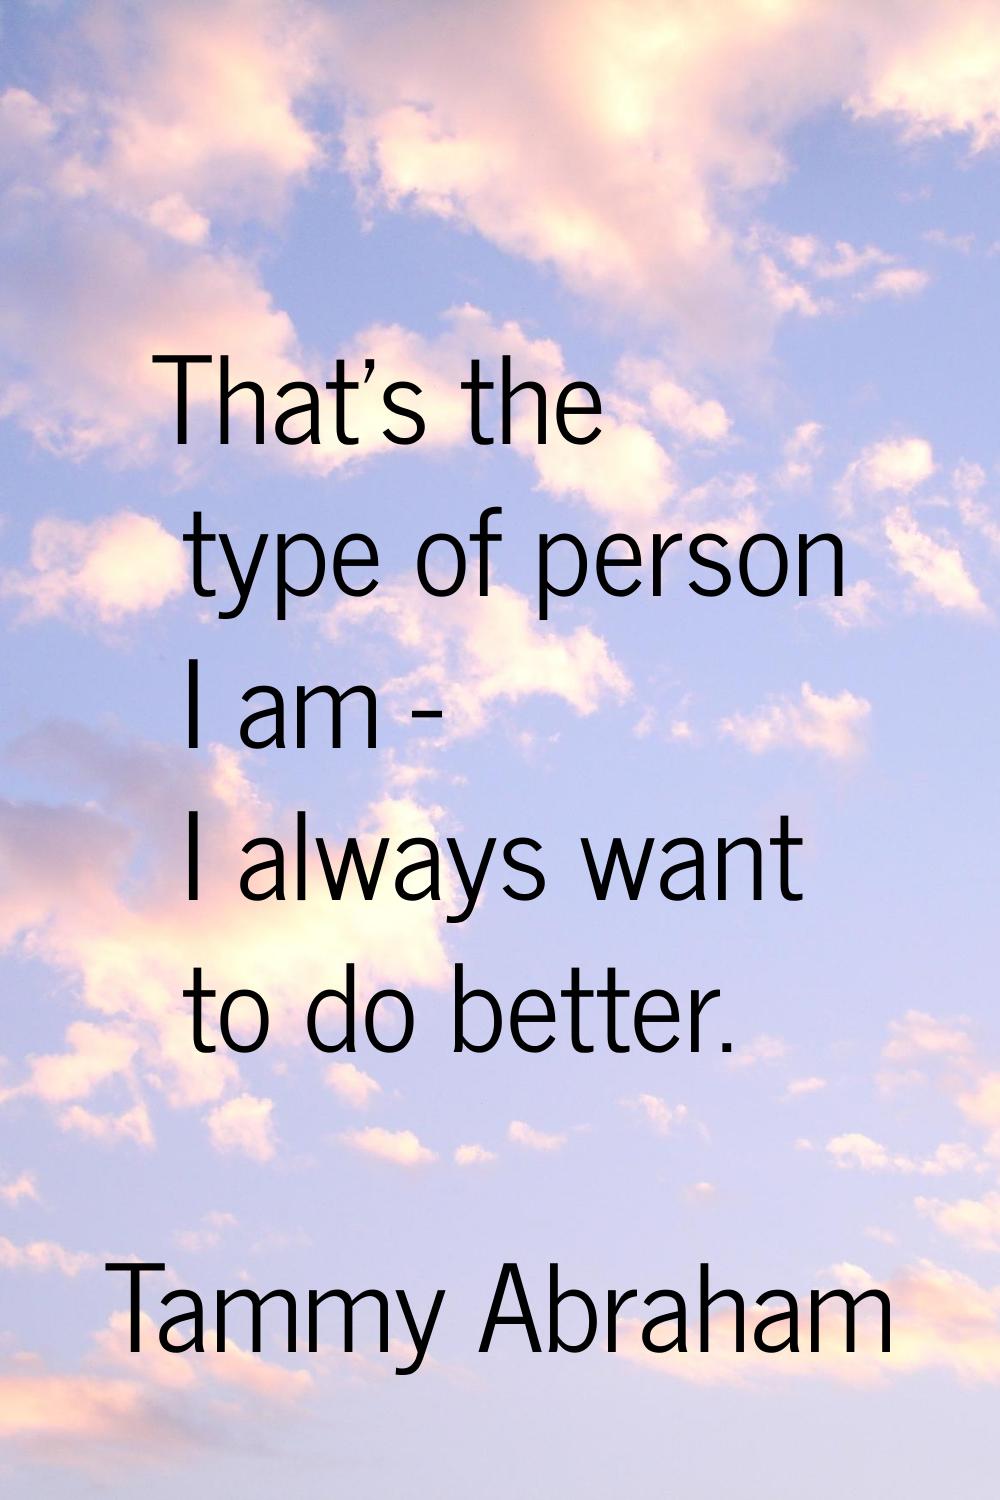 That's the type of person I am - I always want to do better.